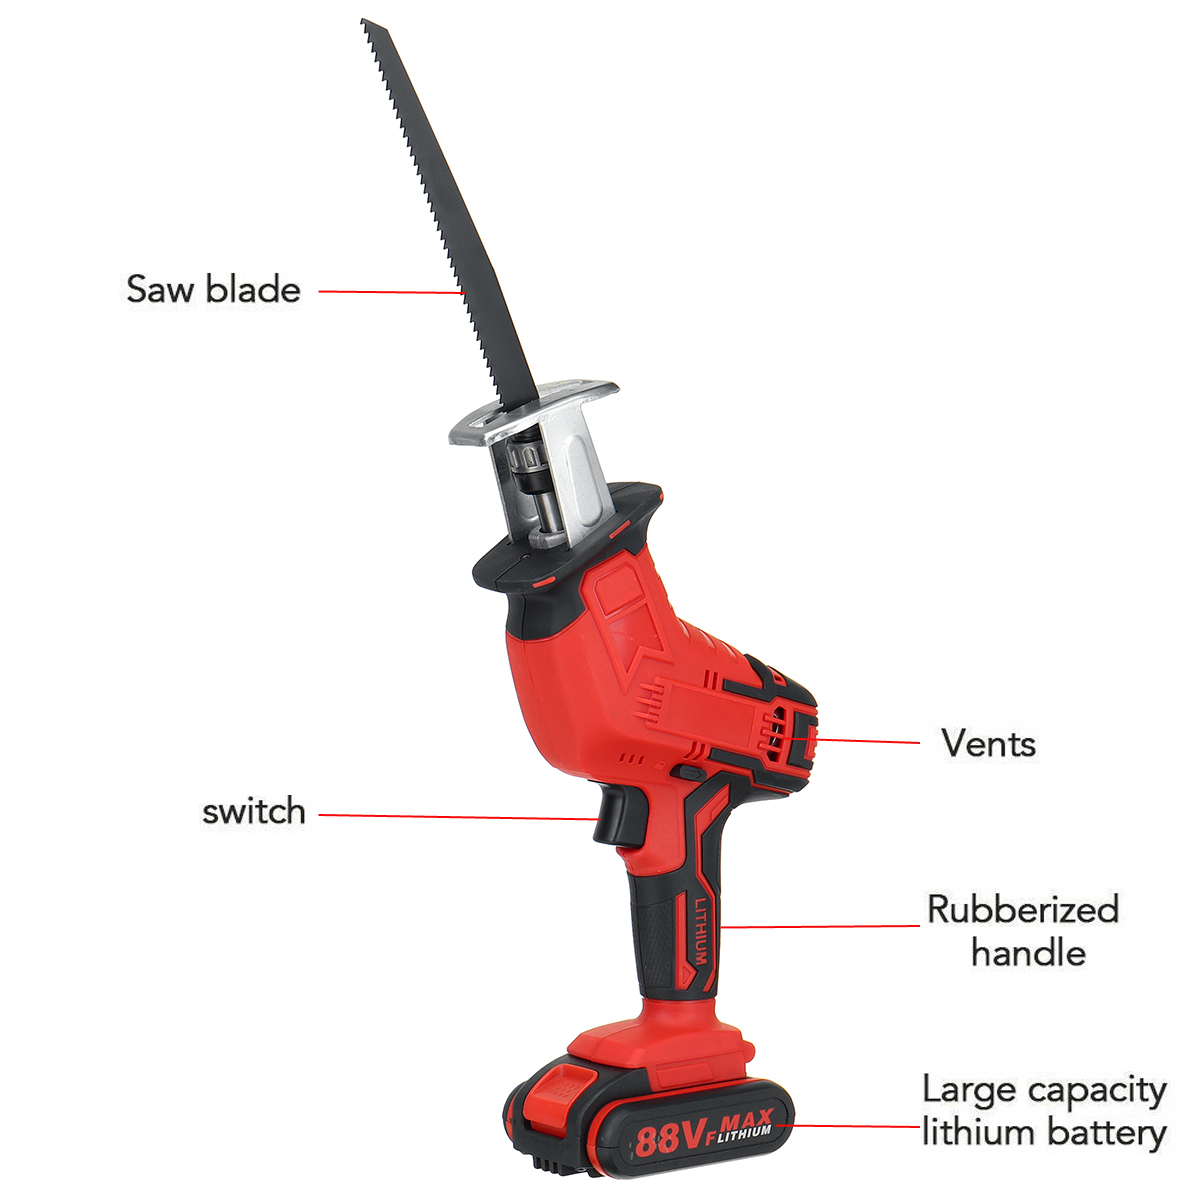 88VF-Electric-Reciprocating-Saw-Outdoor-Cordless-Portable-Saw-Woodworking-Cutter-1733463-8